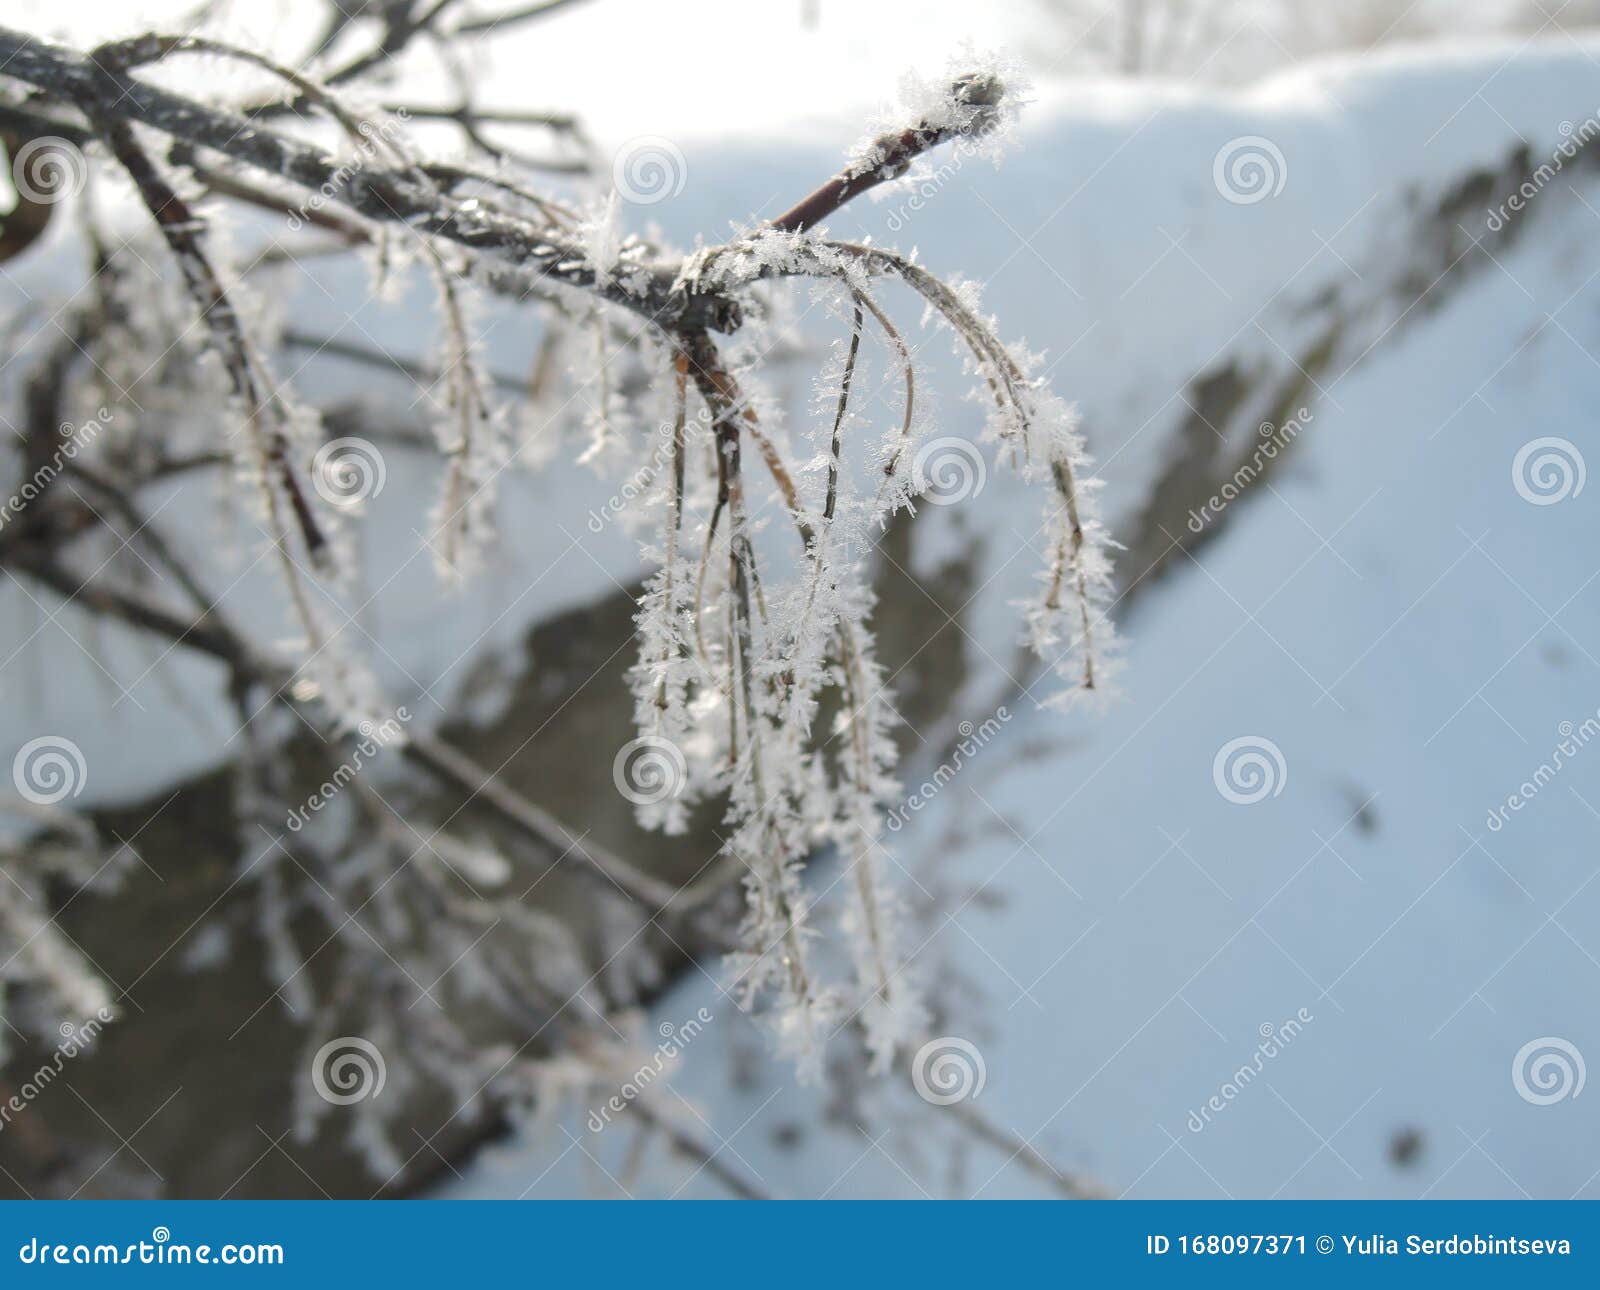 Tree Branches Frozen in the Ice. Frozen Tree Branch in Winter Forest ...